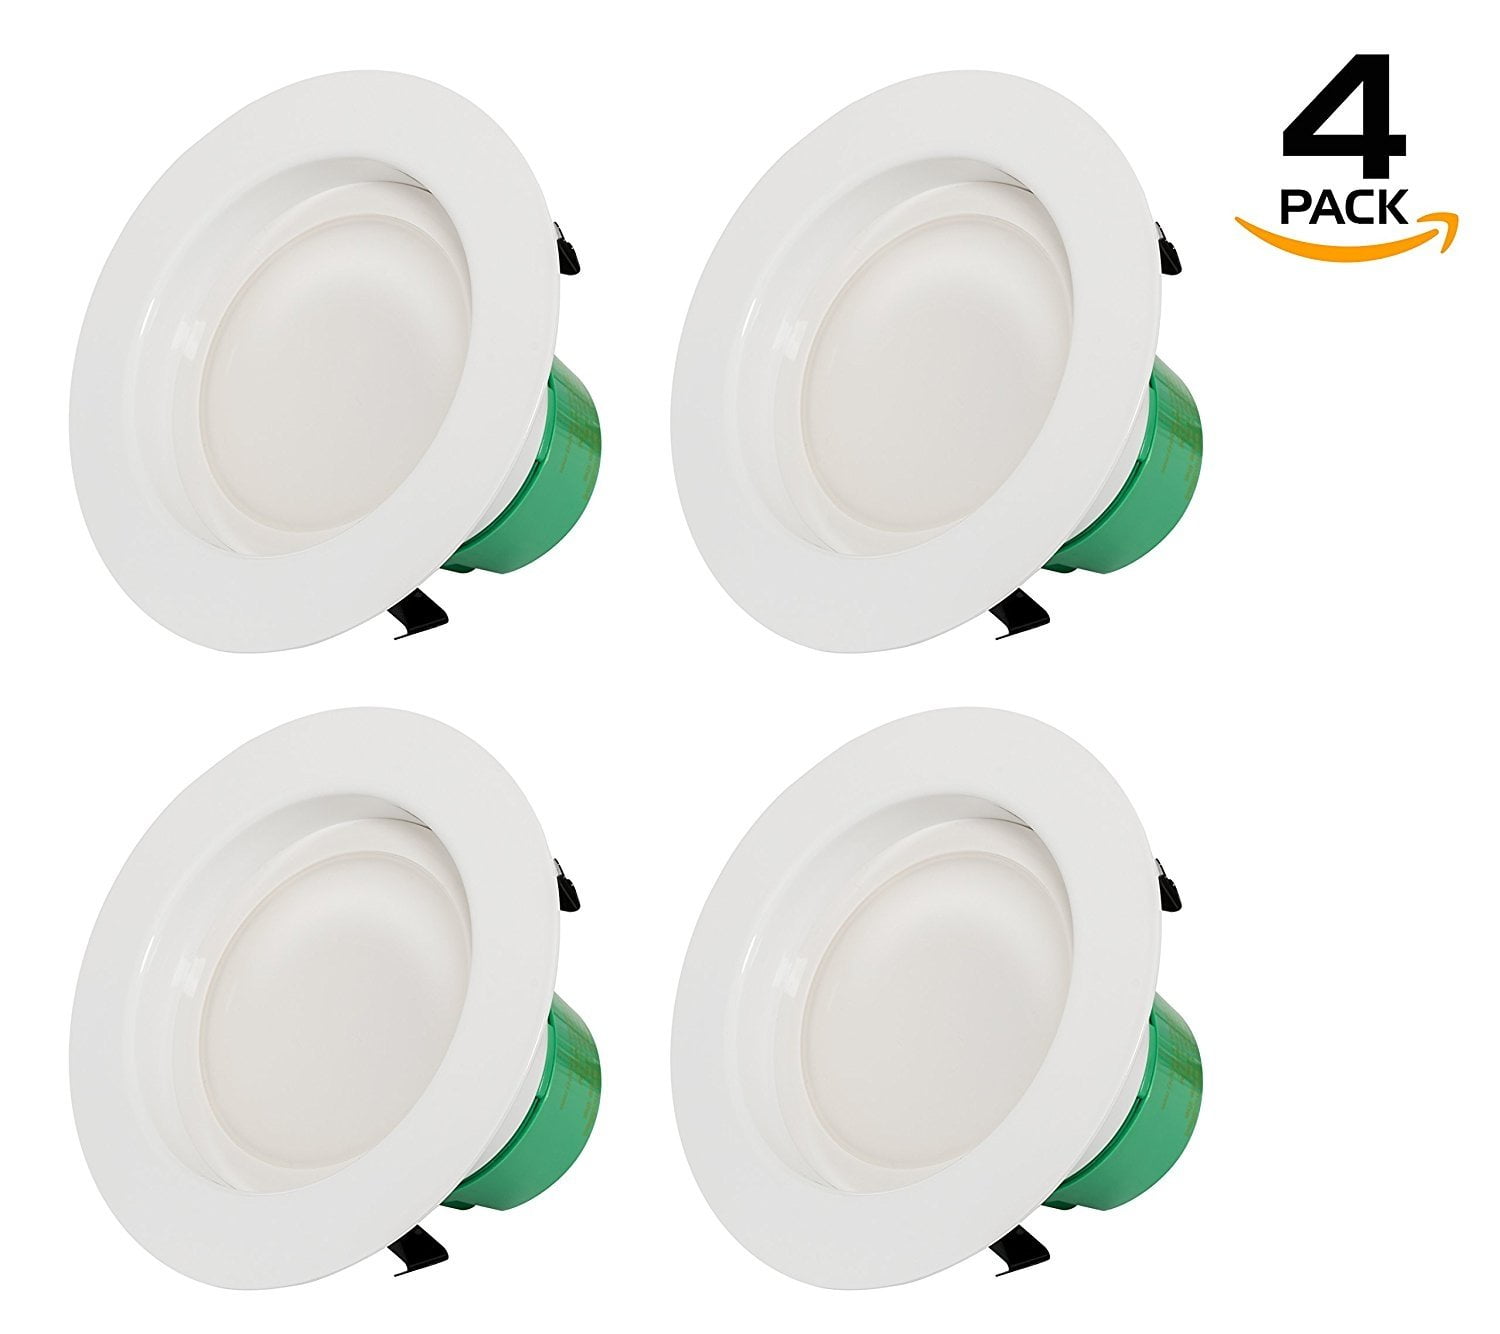 5 Year Warranty Westgate Lighting 19 Watt 6 Inch Recessed Lighting Kit Dimmable LED Retrofit Downlight with Integrated Smooth Trim 120V 3500K Neutral White, 8 Pack 